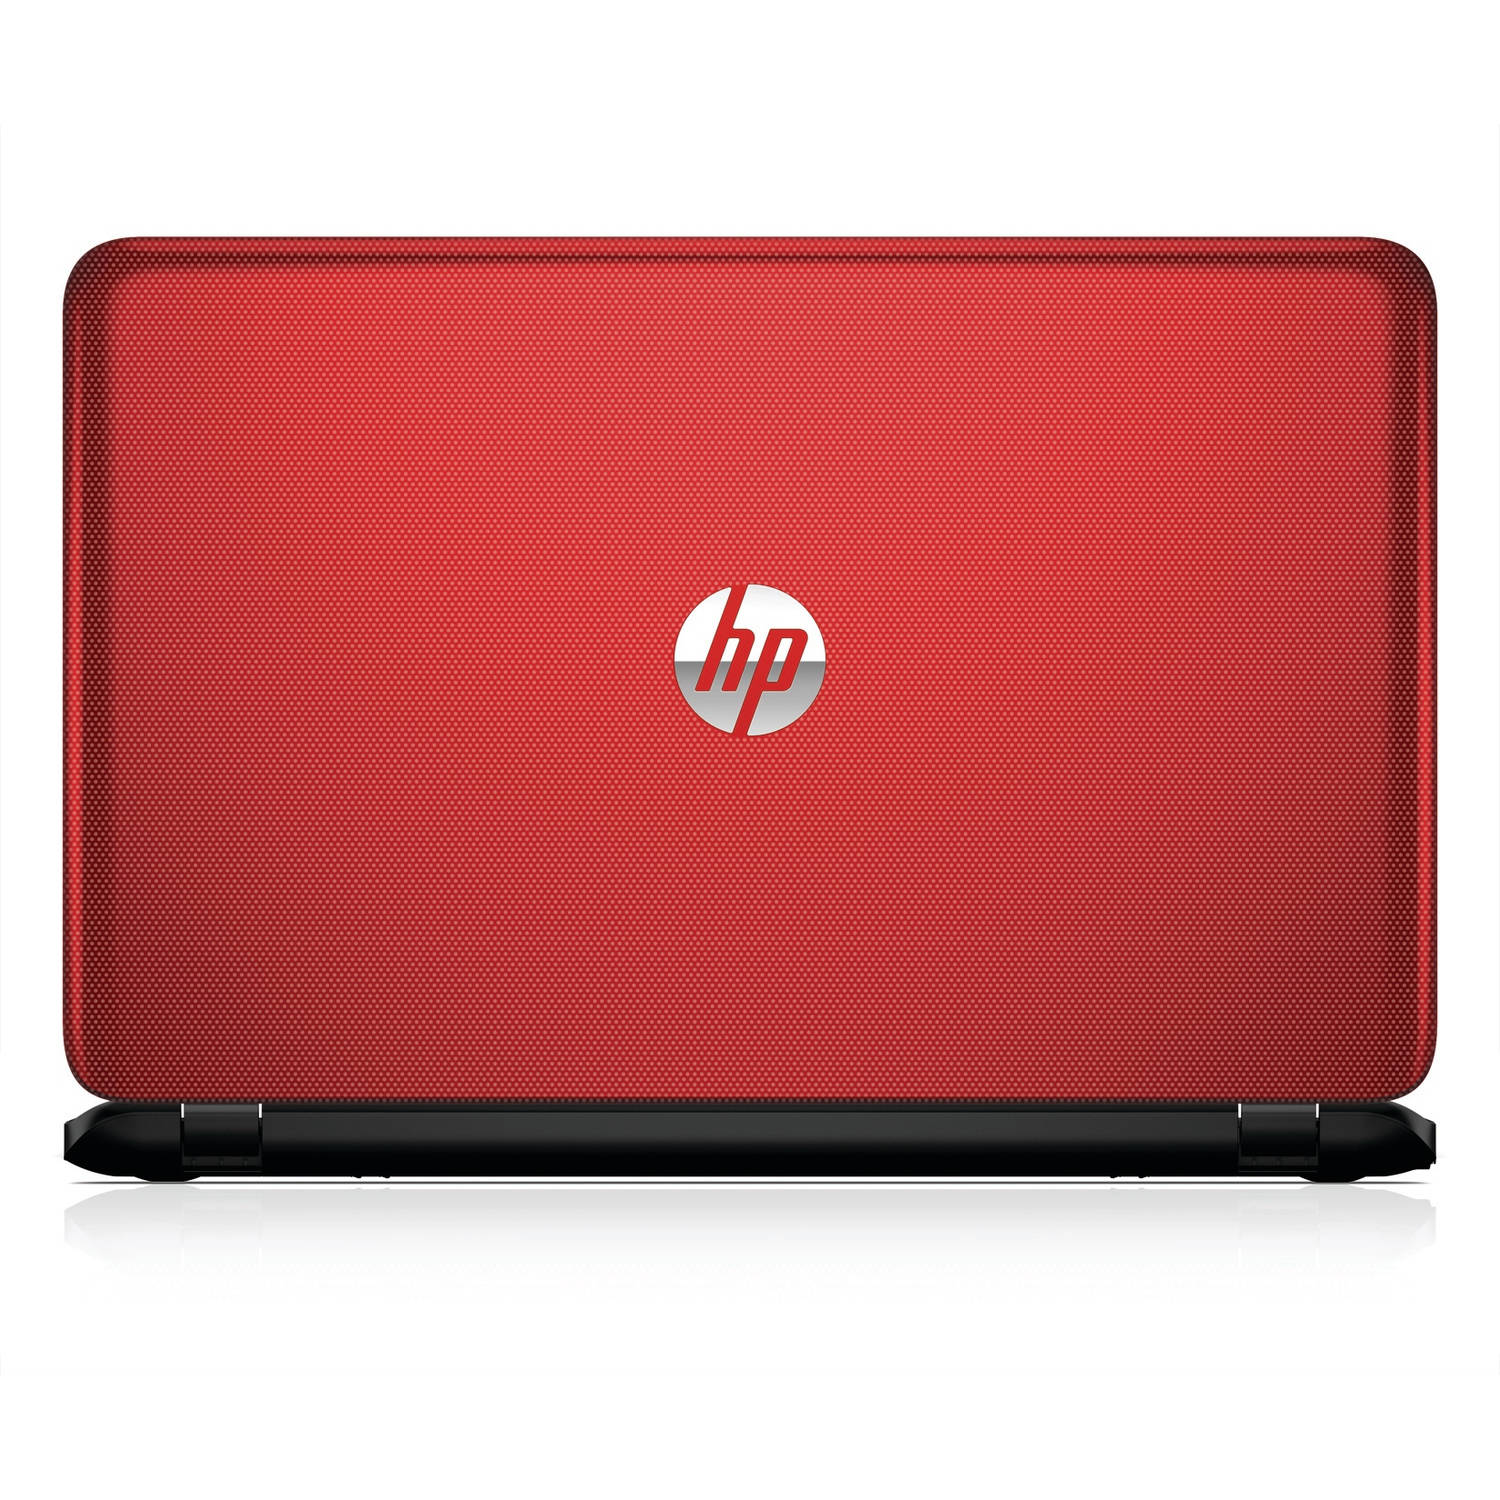 HP Flyer Red 15.6" 15-f272wm Laptop PC with Intel Pentium N3540 Processor, 4GB Memory, 500GB Hard Drive and Windows 10 Home - image 3 of 4